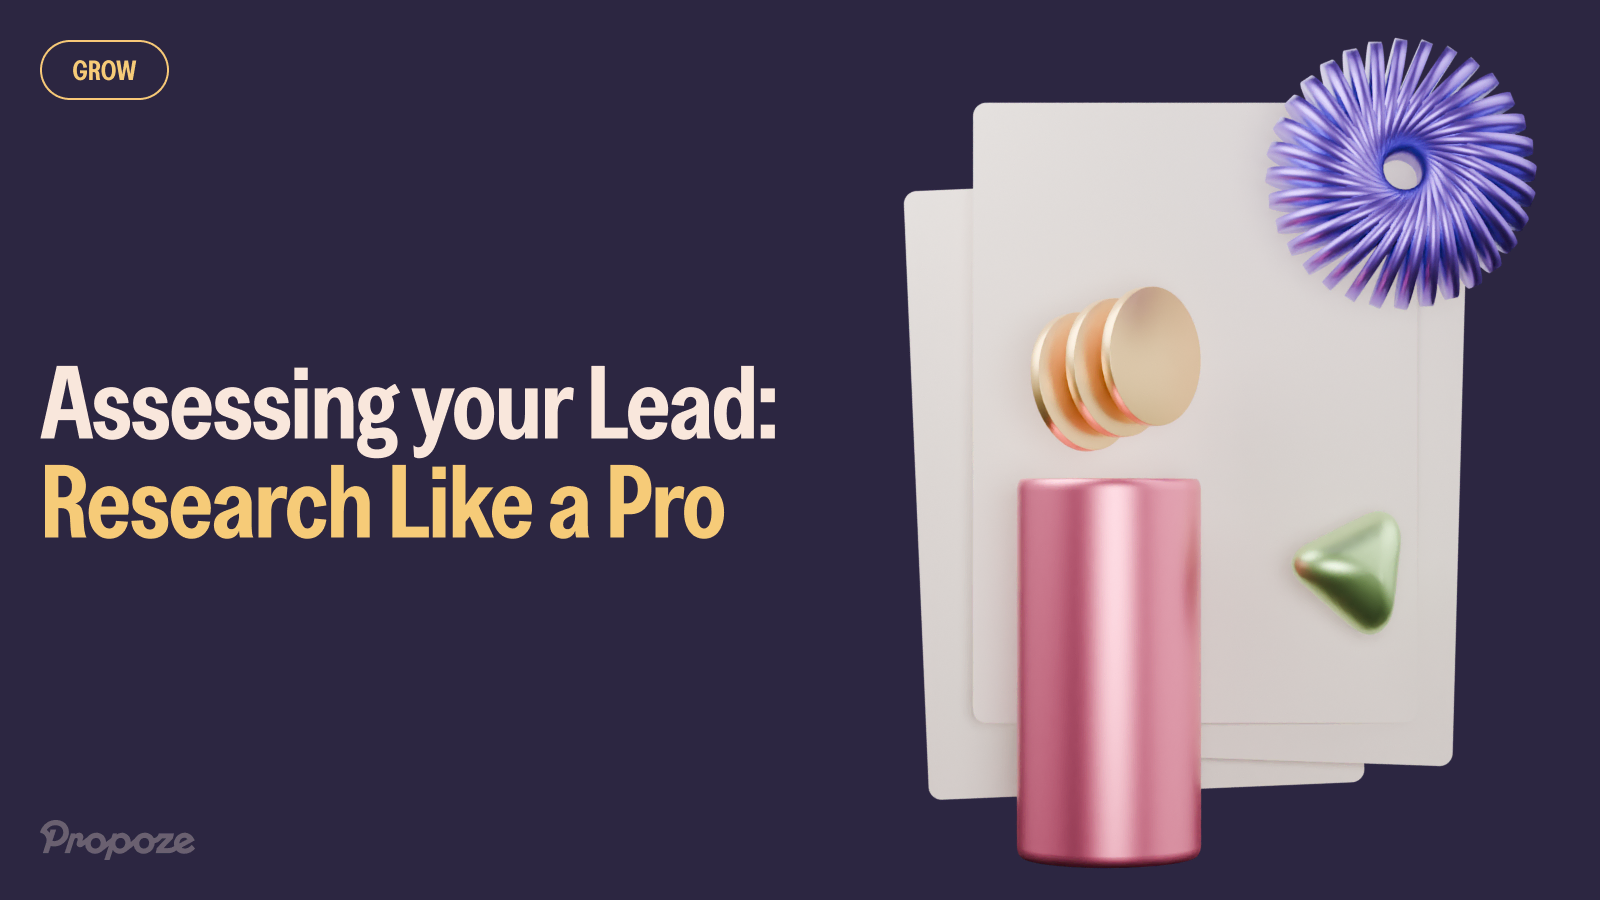 Assessing your Lead: Research Like a Pro